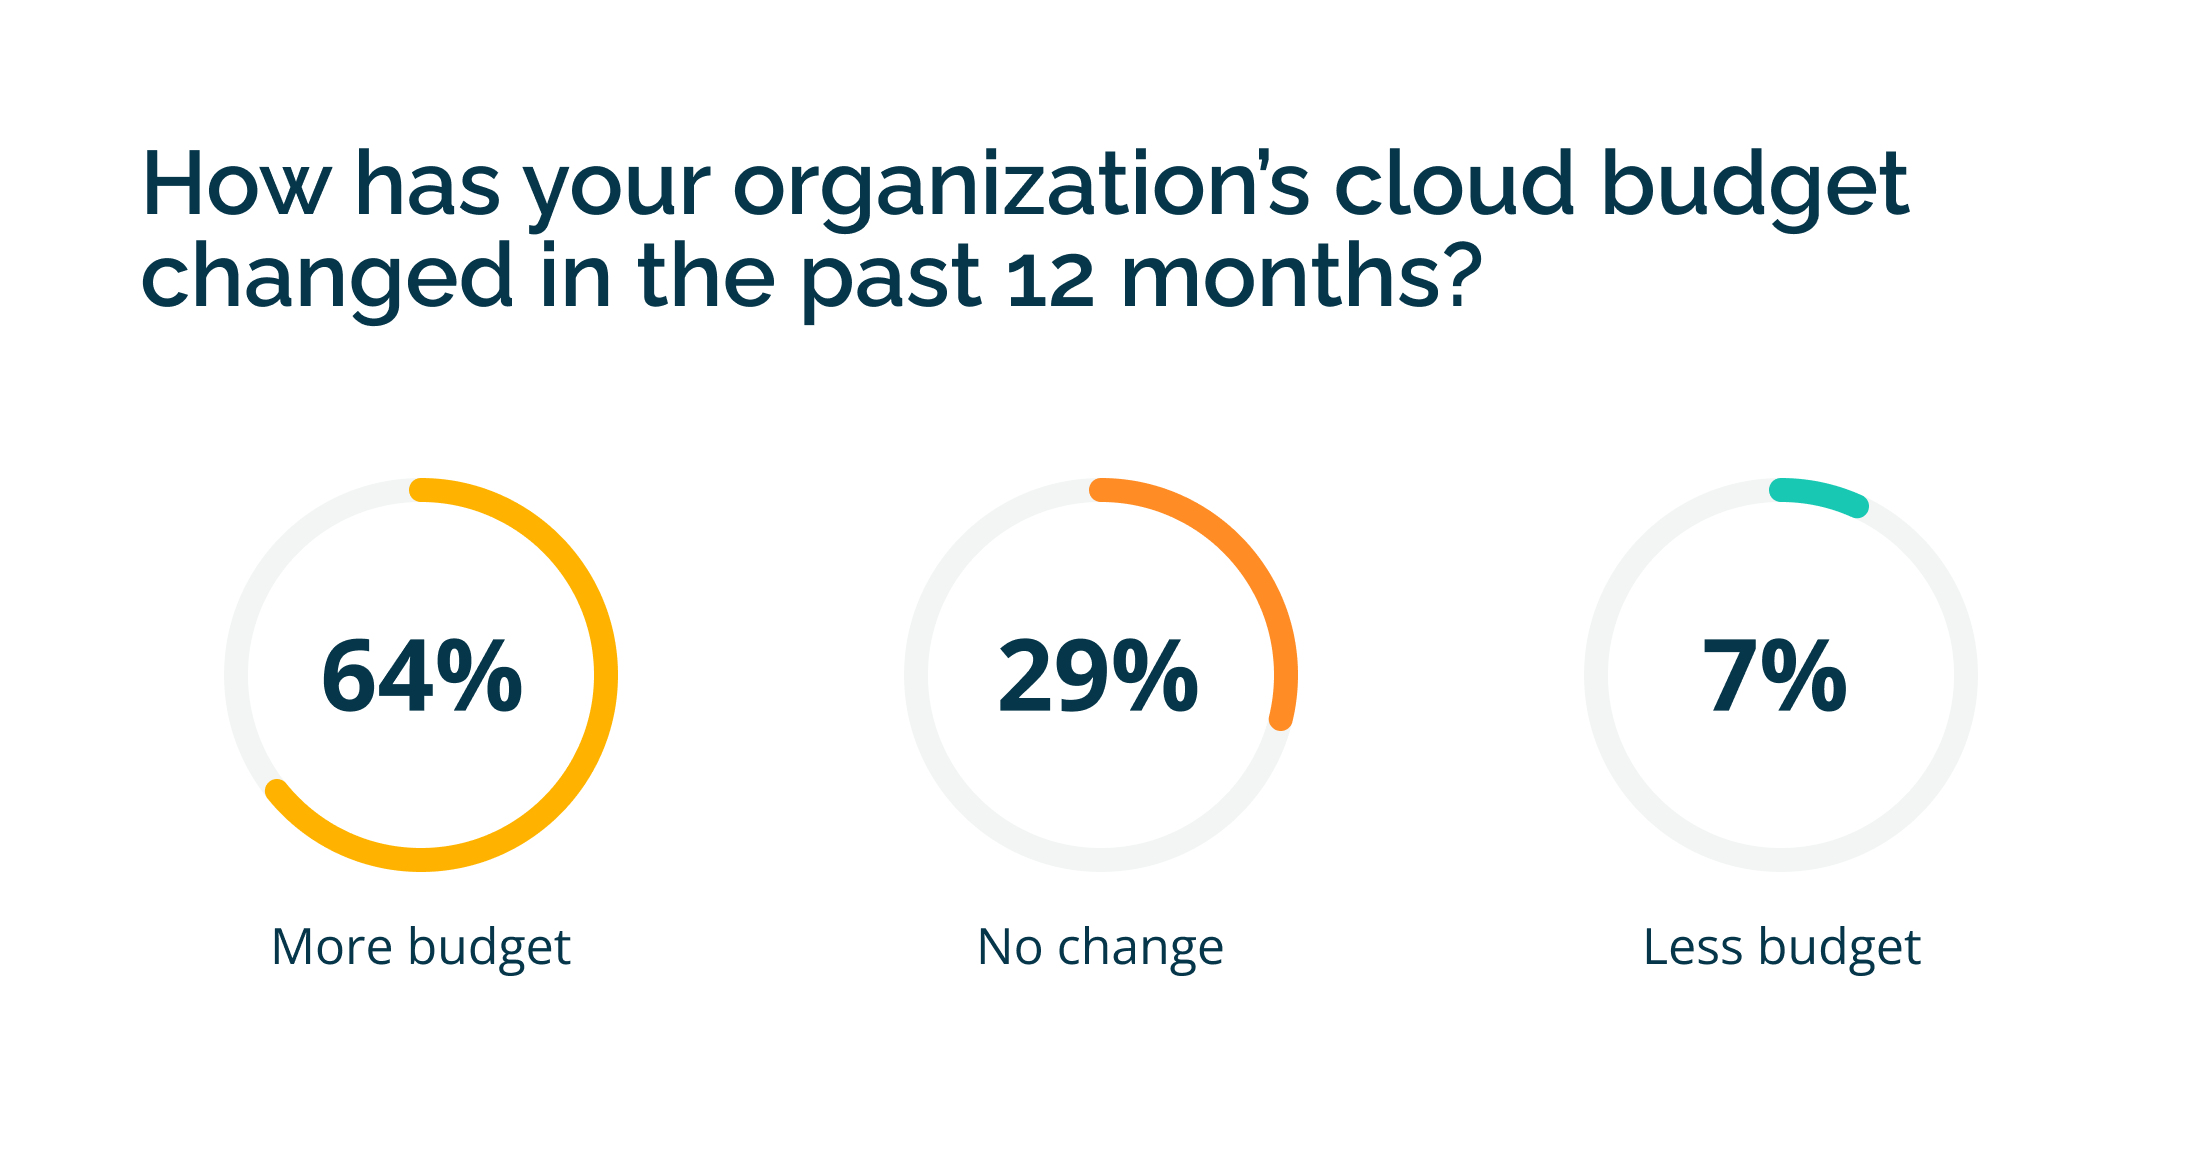 How has your organization's cloud budget changed in the past 12 months